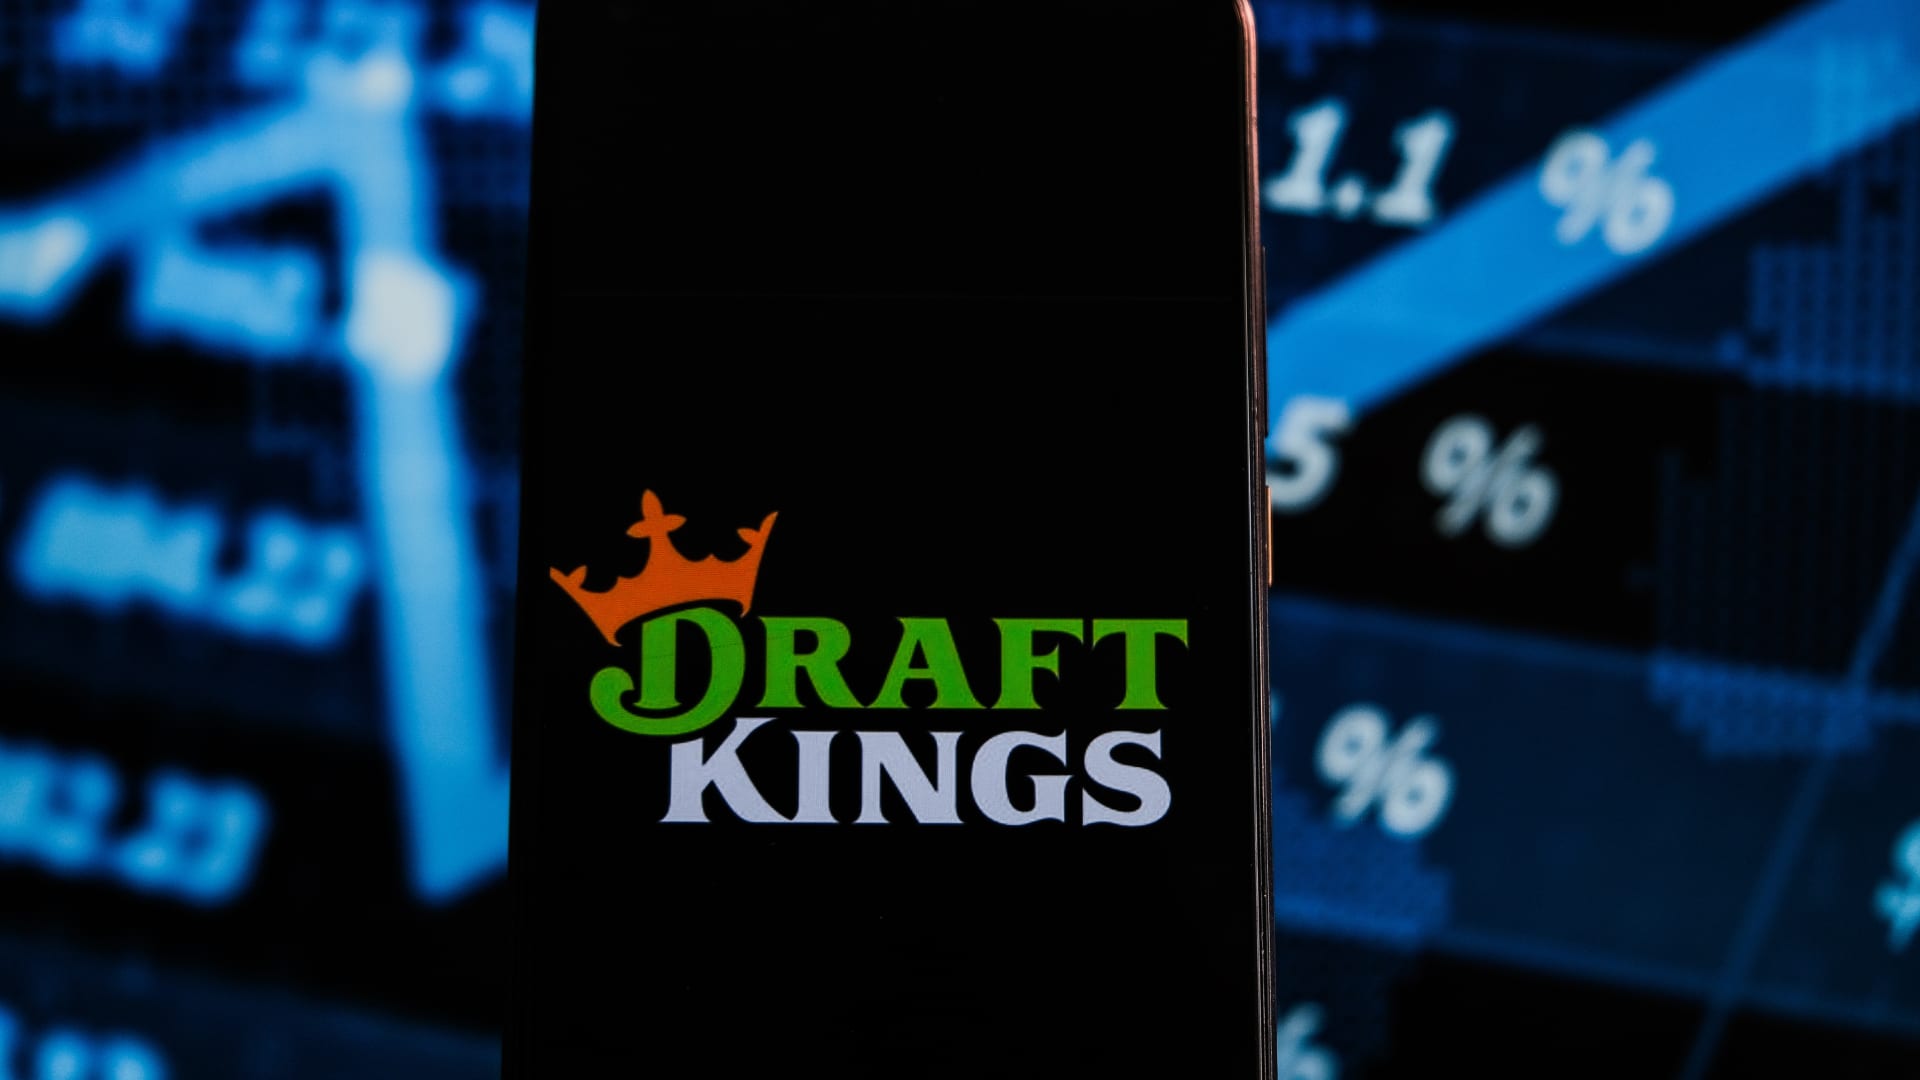 DraftKings says no evidence systems were breached following report of a hack